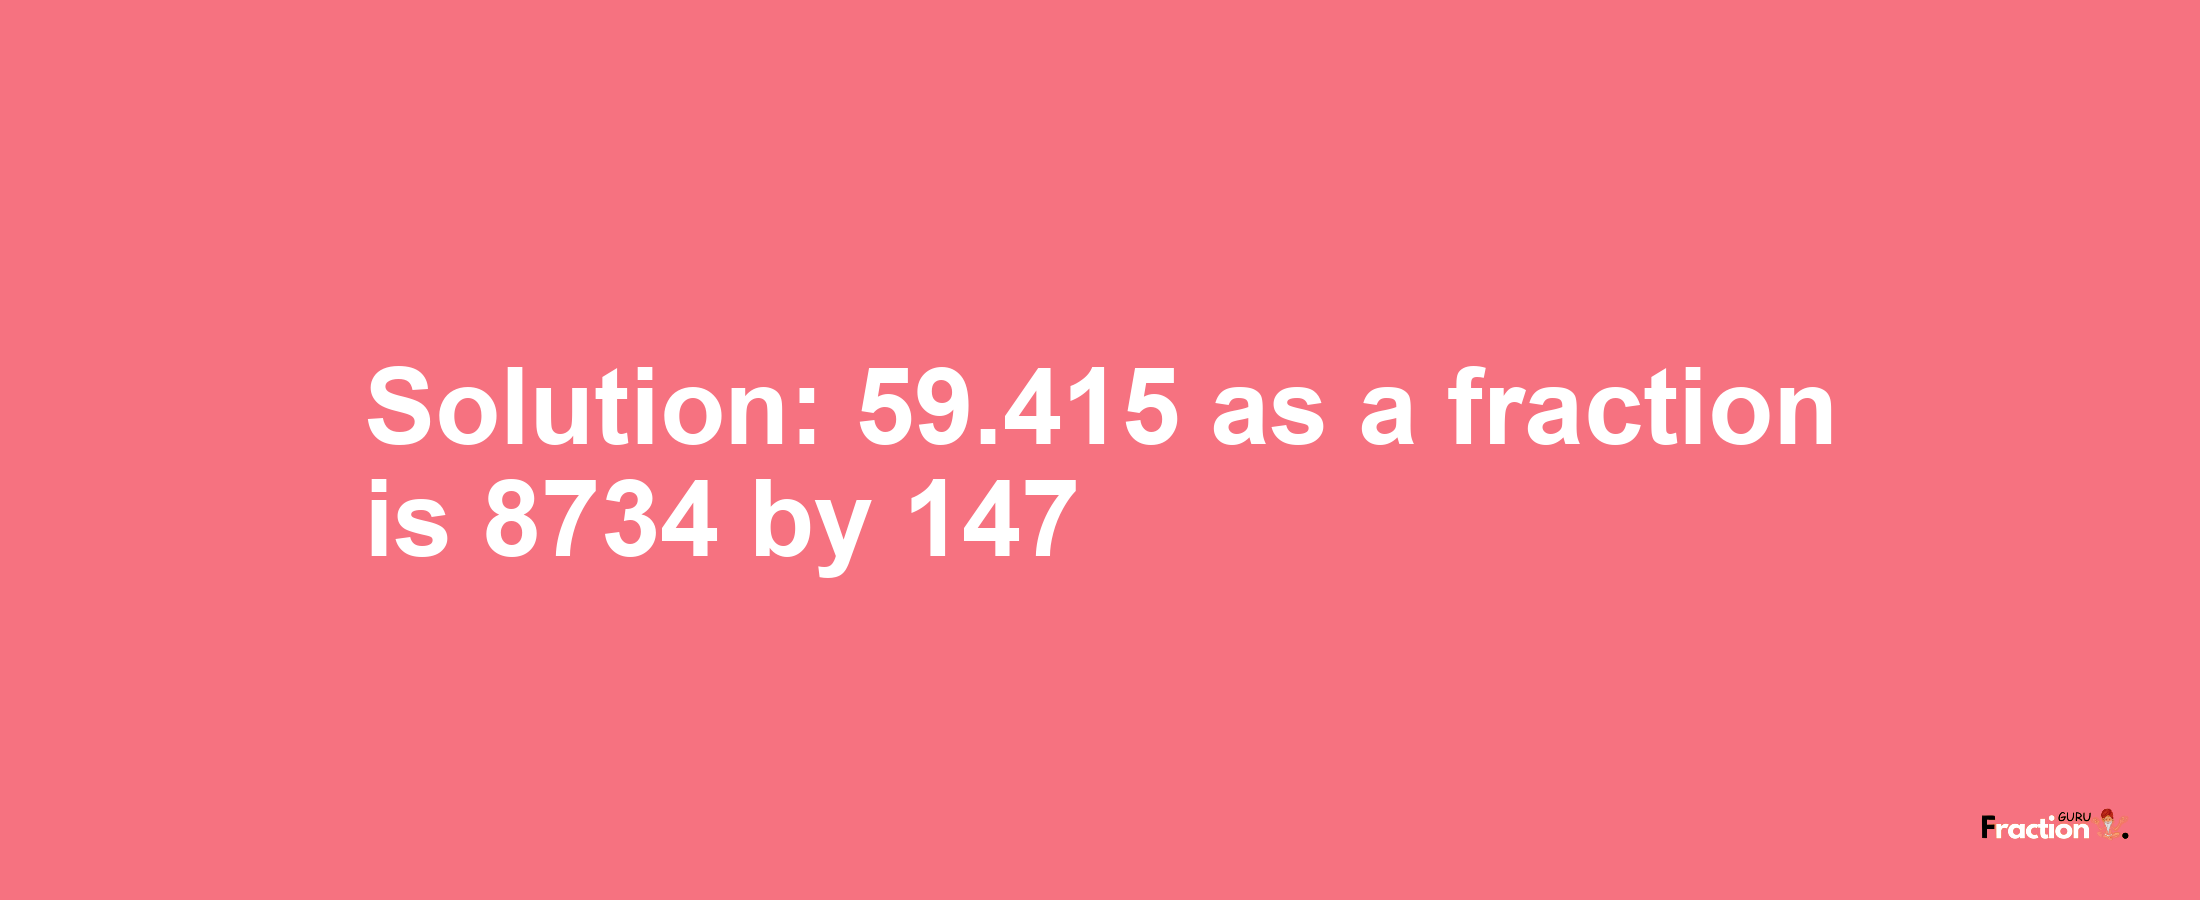 Solution:59.415 as a fraction is 8734/147